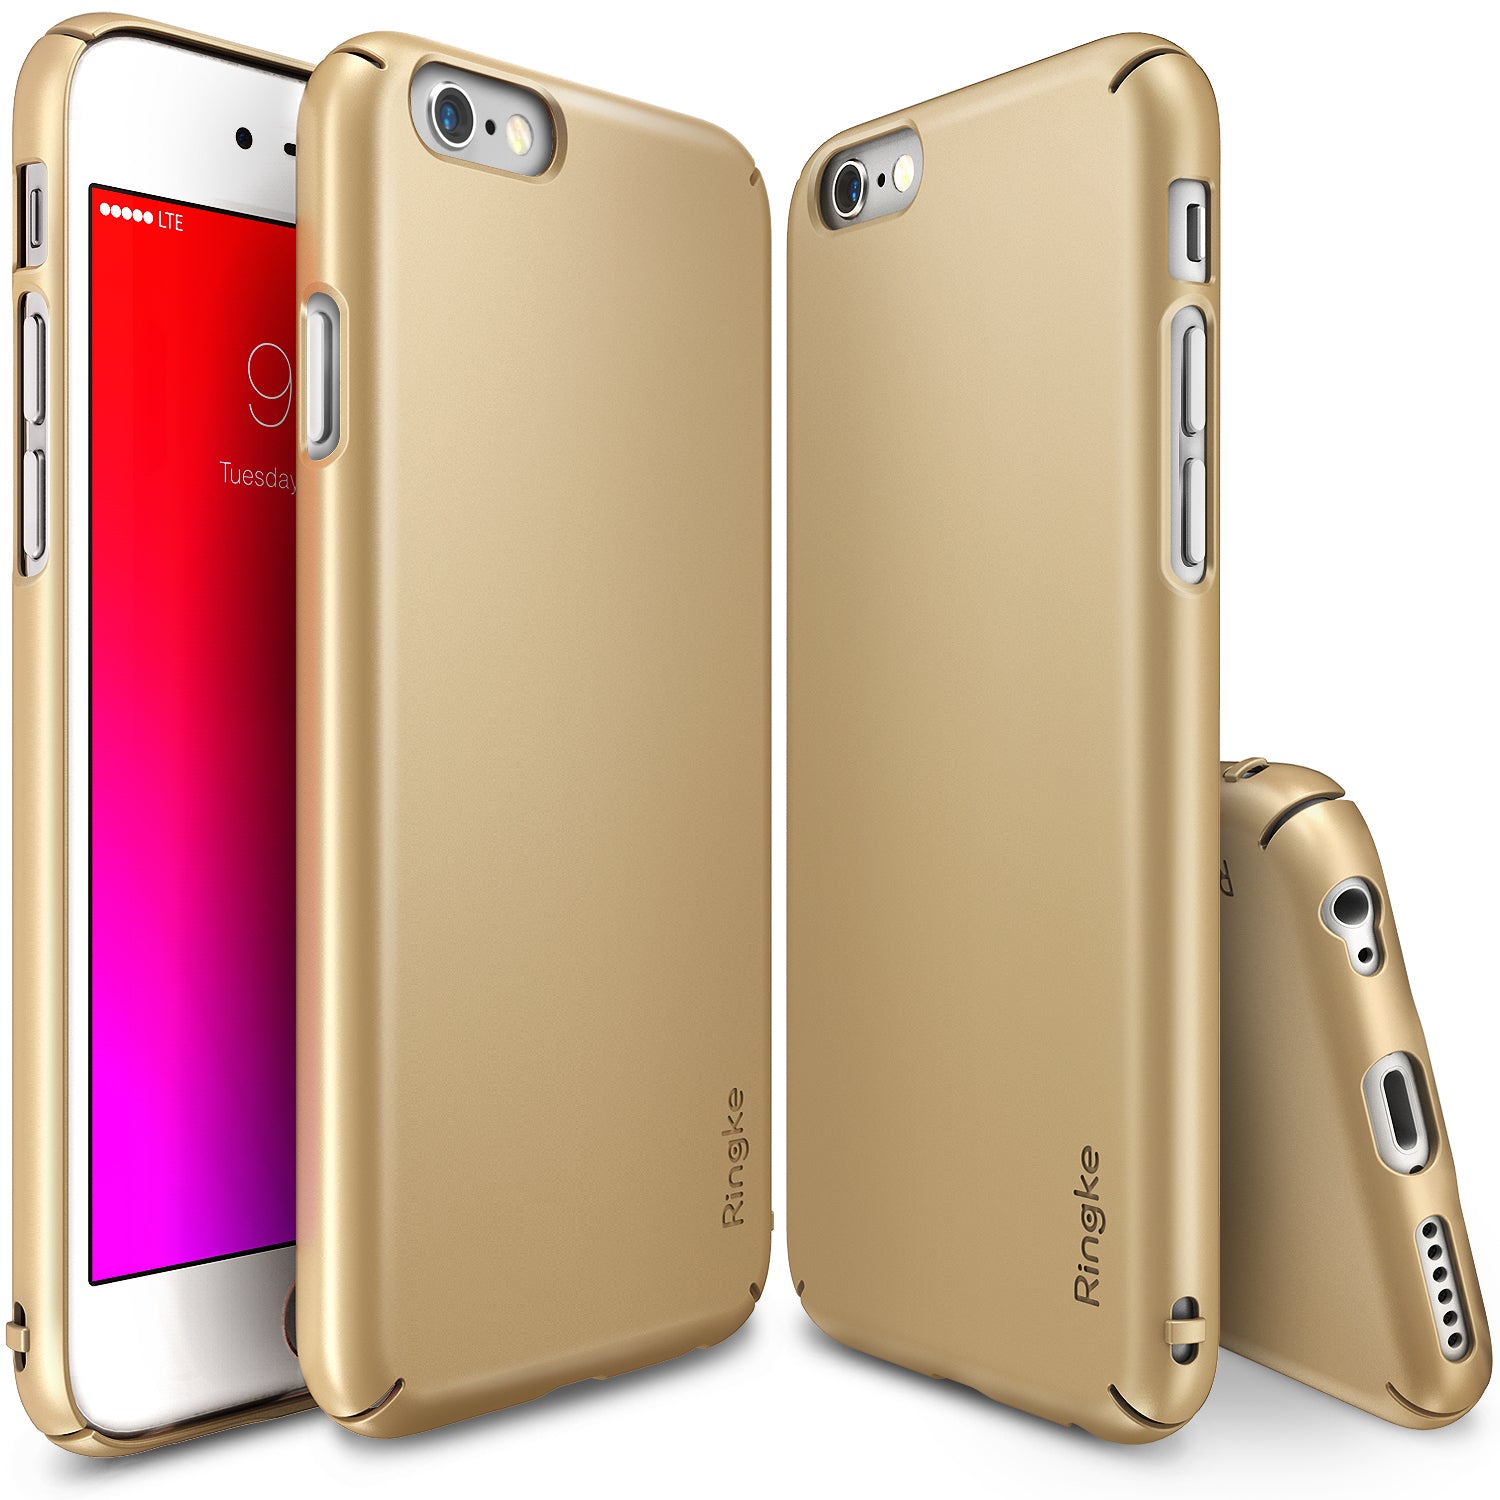 ringke slim lightweight hard pc thin case cover for iphone 6s plus main royal gold